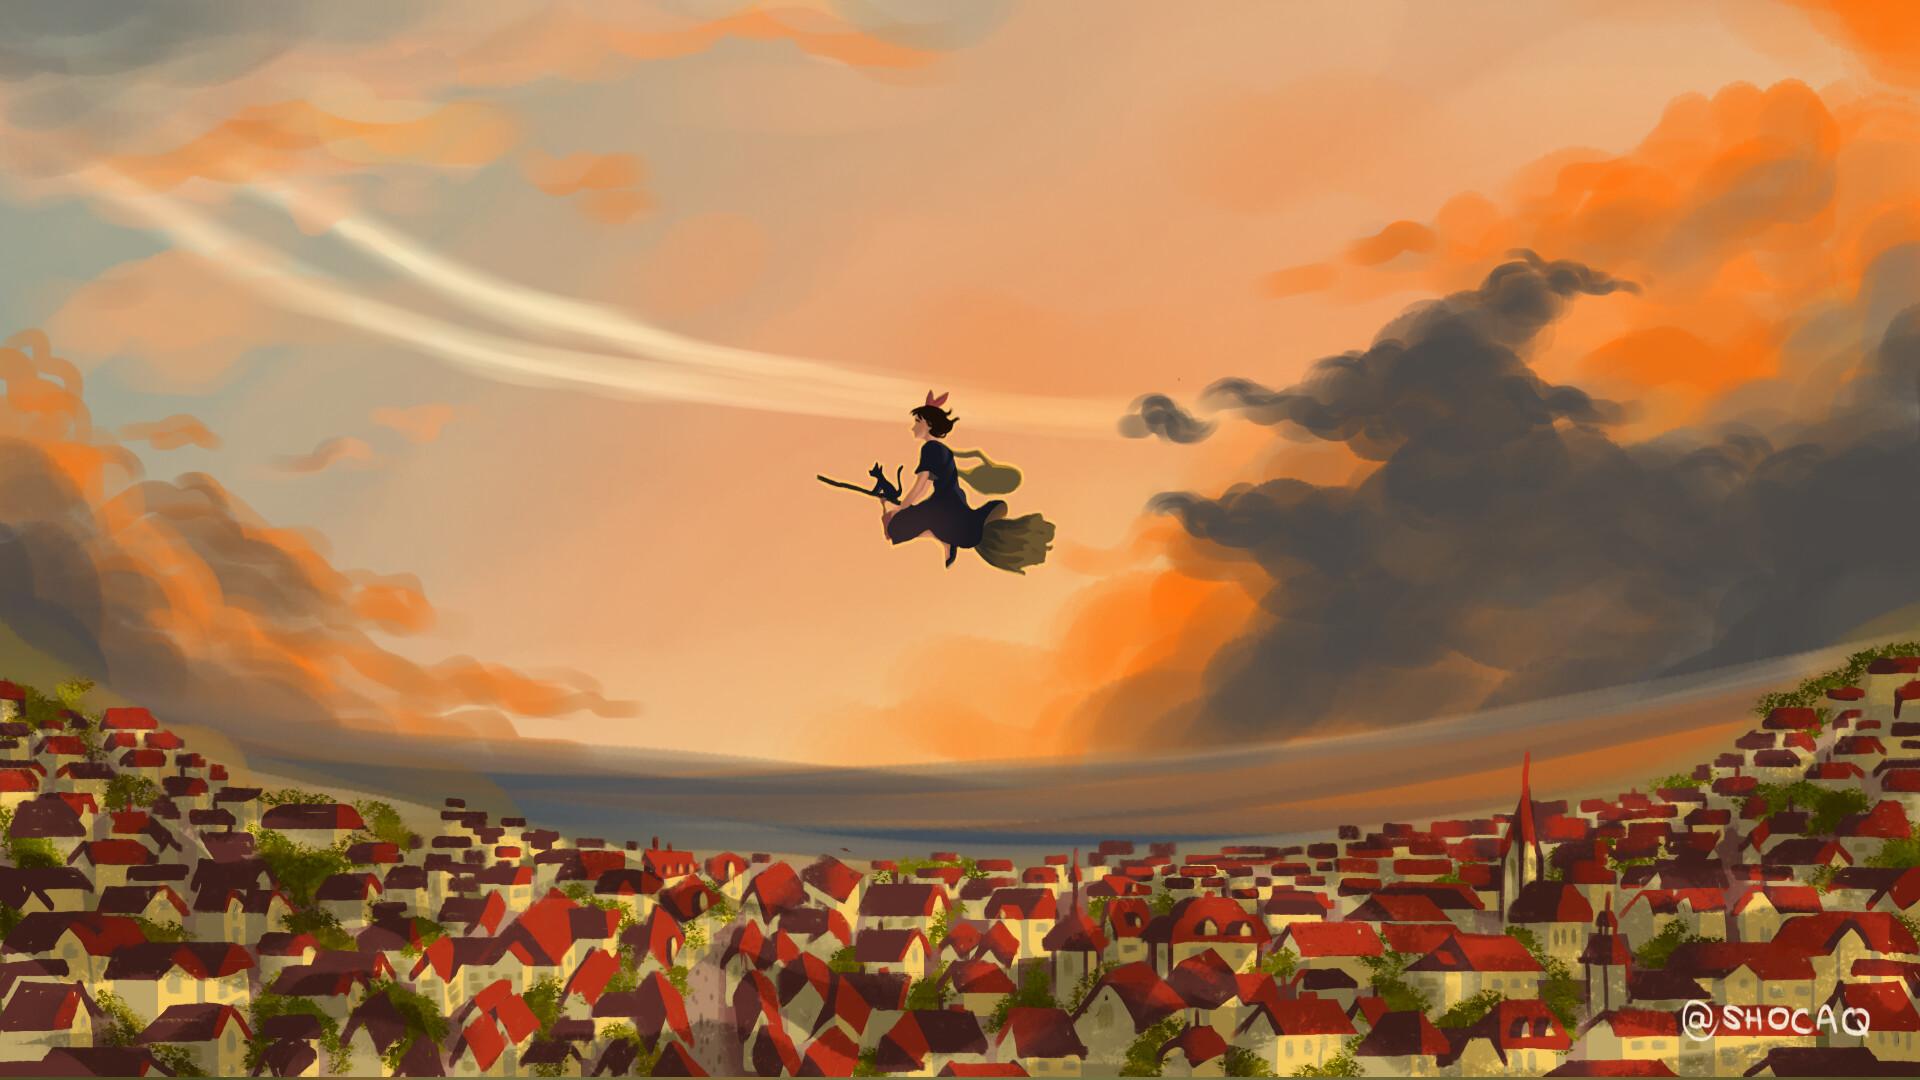 HD kikis delivery service wallpapers  Peakpx